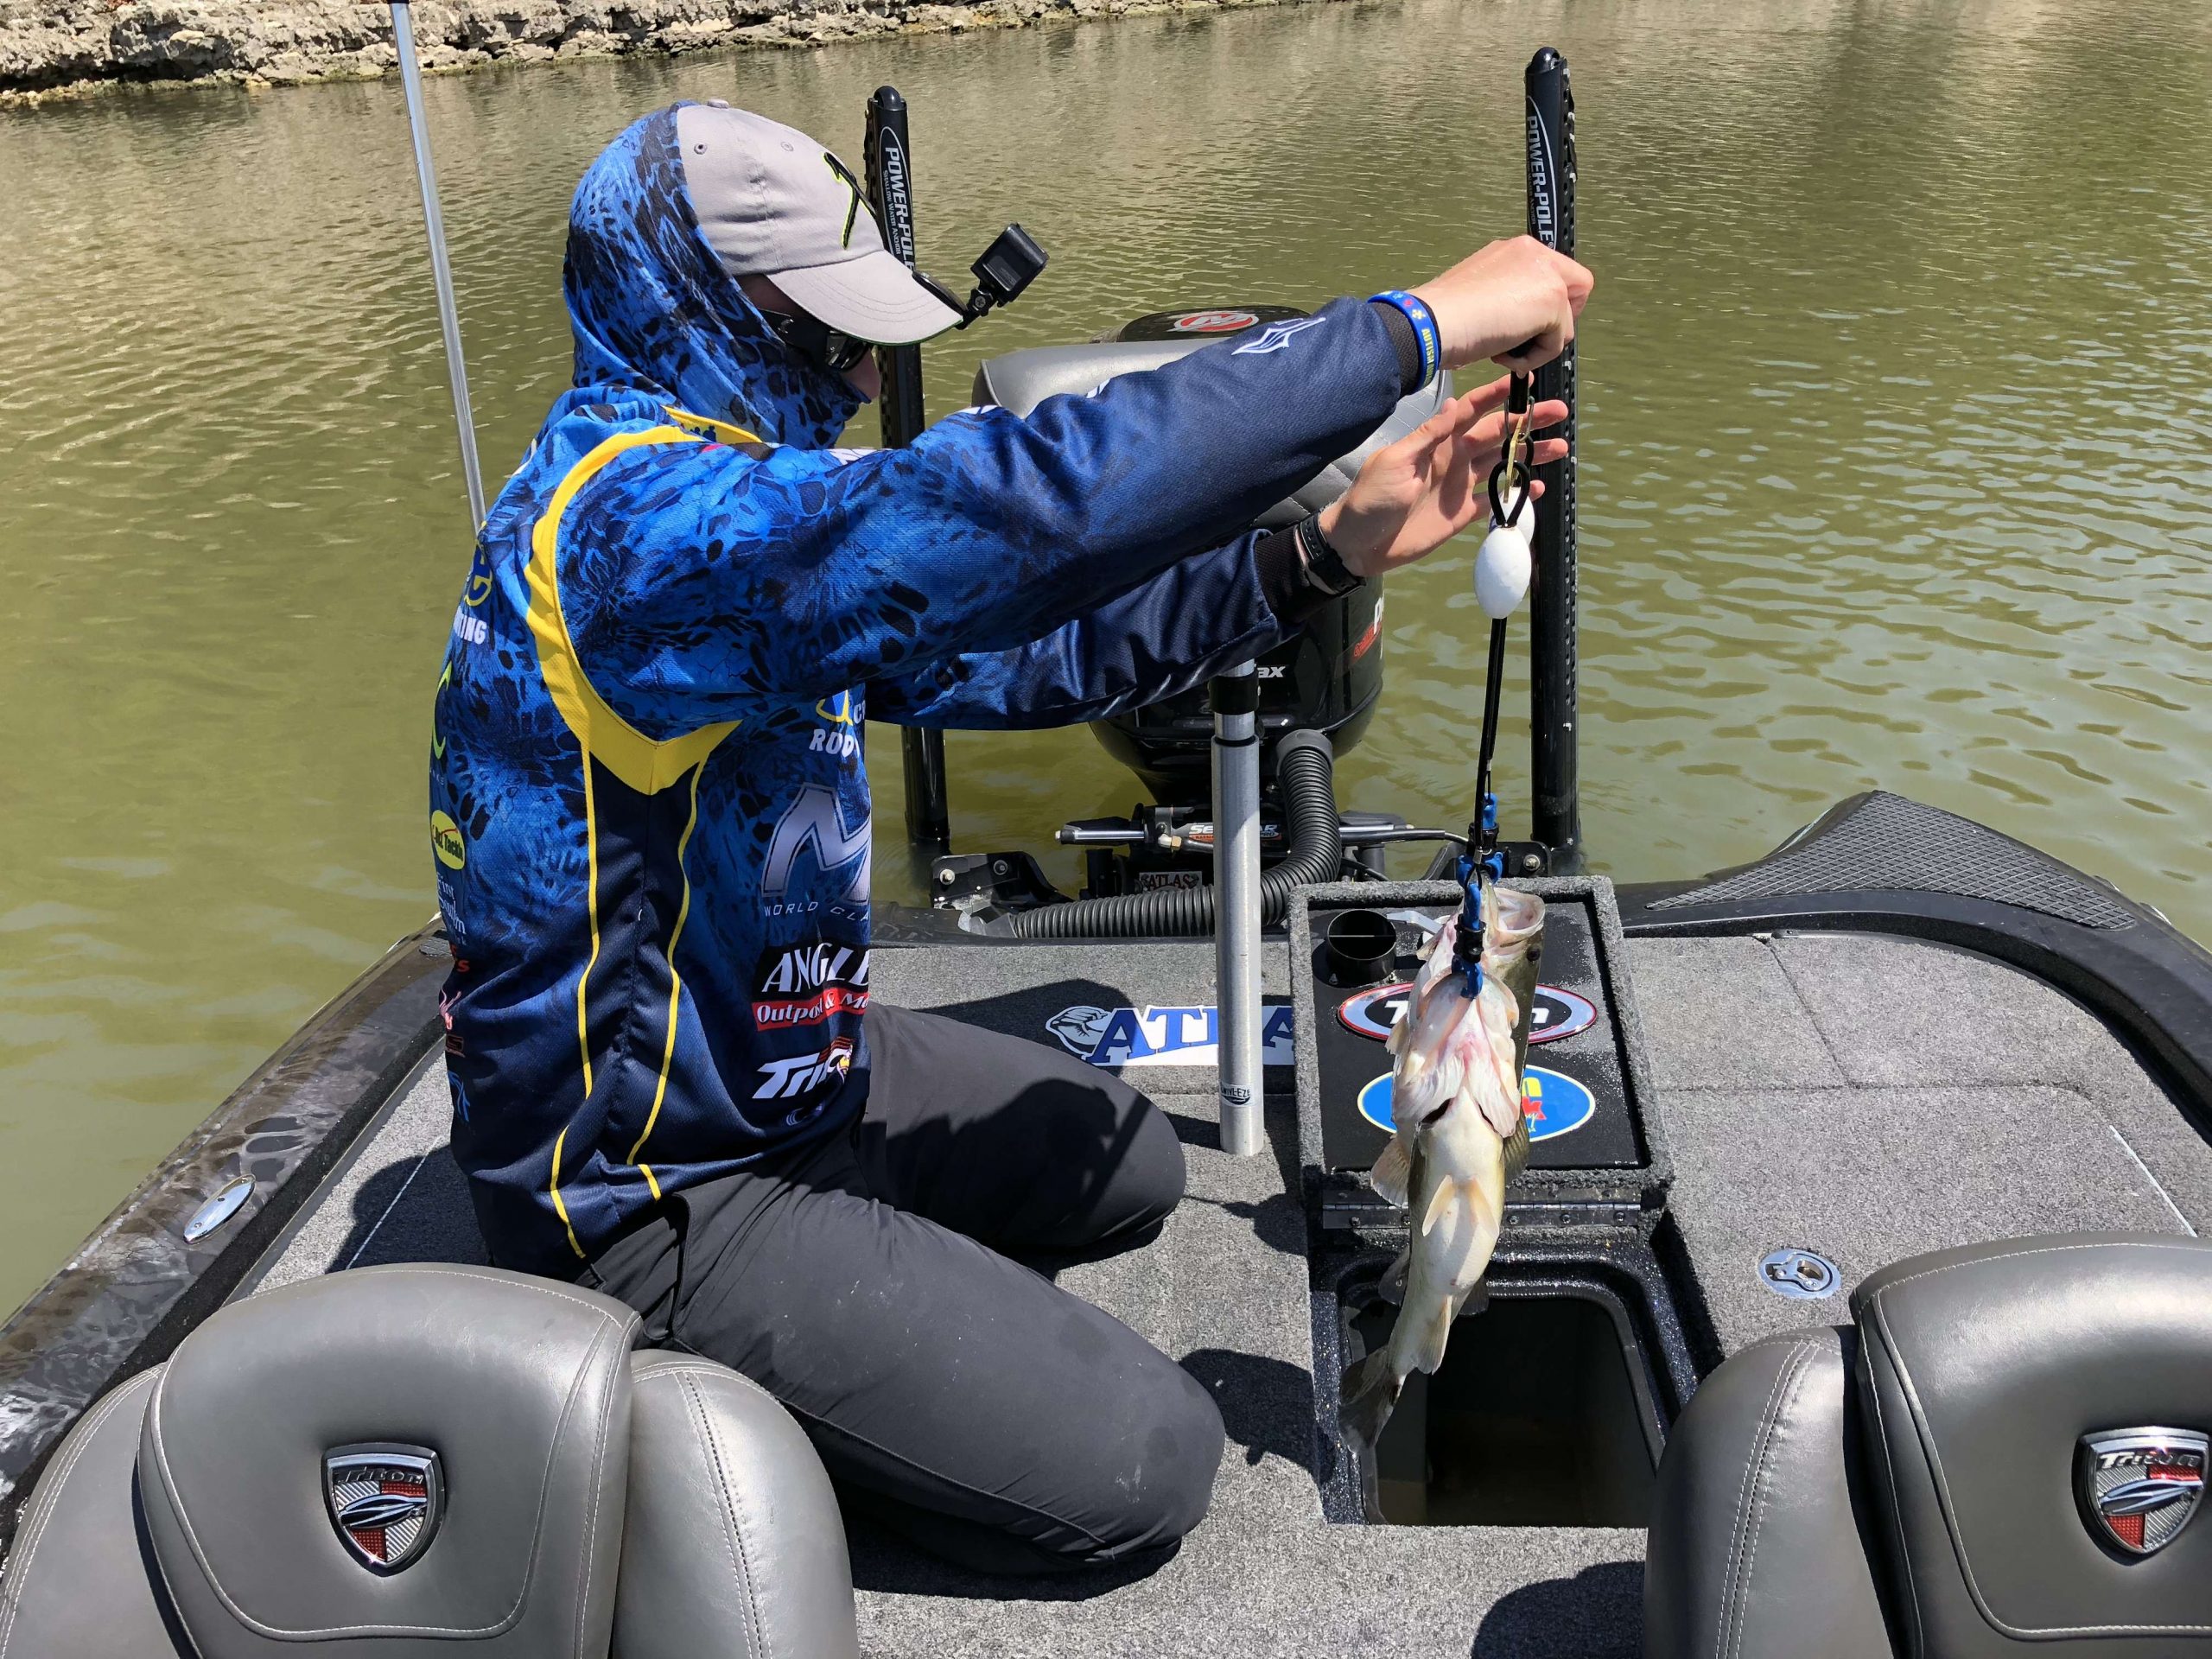 Bradley Roy is beaming a couple of bass. He uses a weight management culling system, but he still likes to check to be sure. He told his Marshal, âa couple of ounces might get me up another place or two.â That is  a $500 decision at this level of competition.